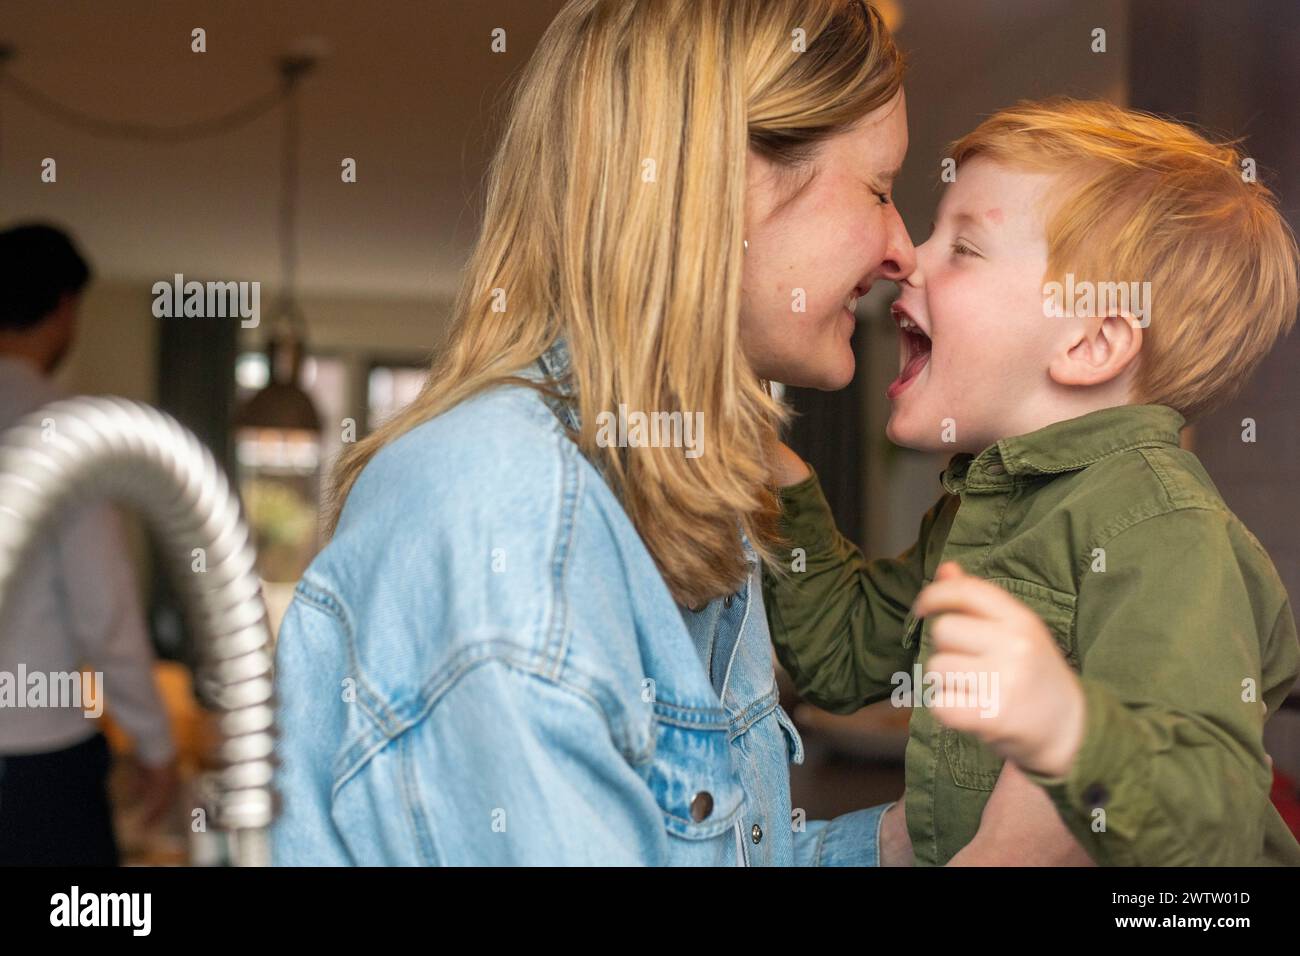 Joyful moment as a mother and son share a laugh together Stock Photo